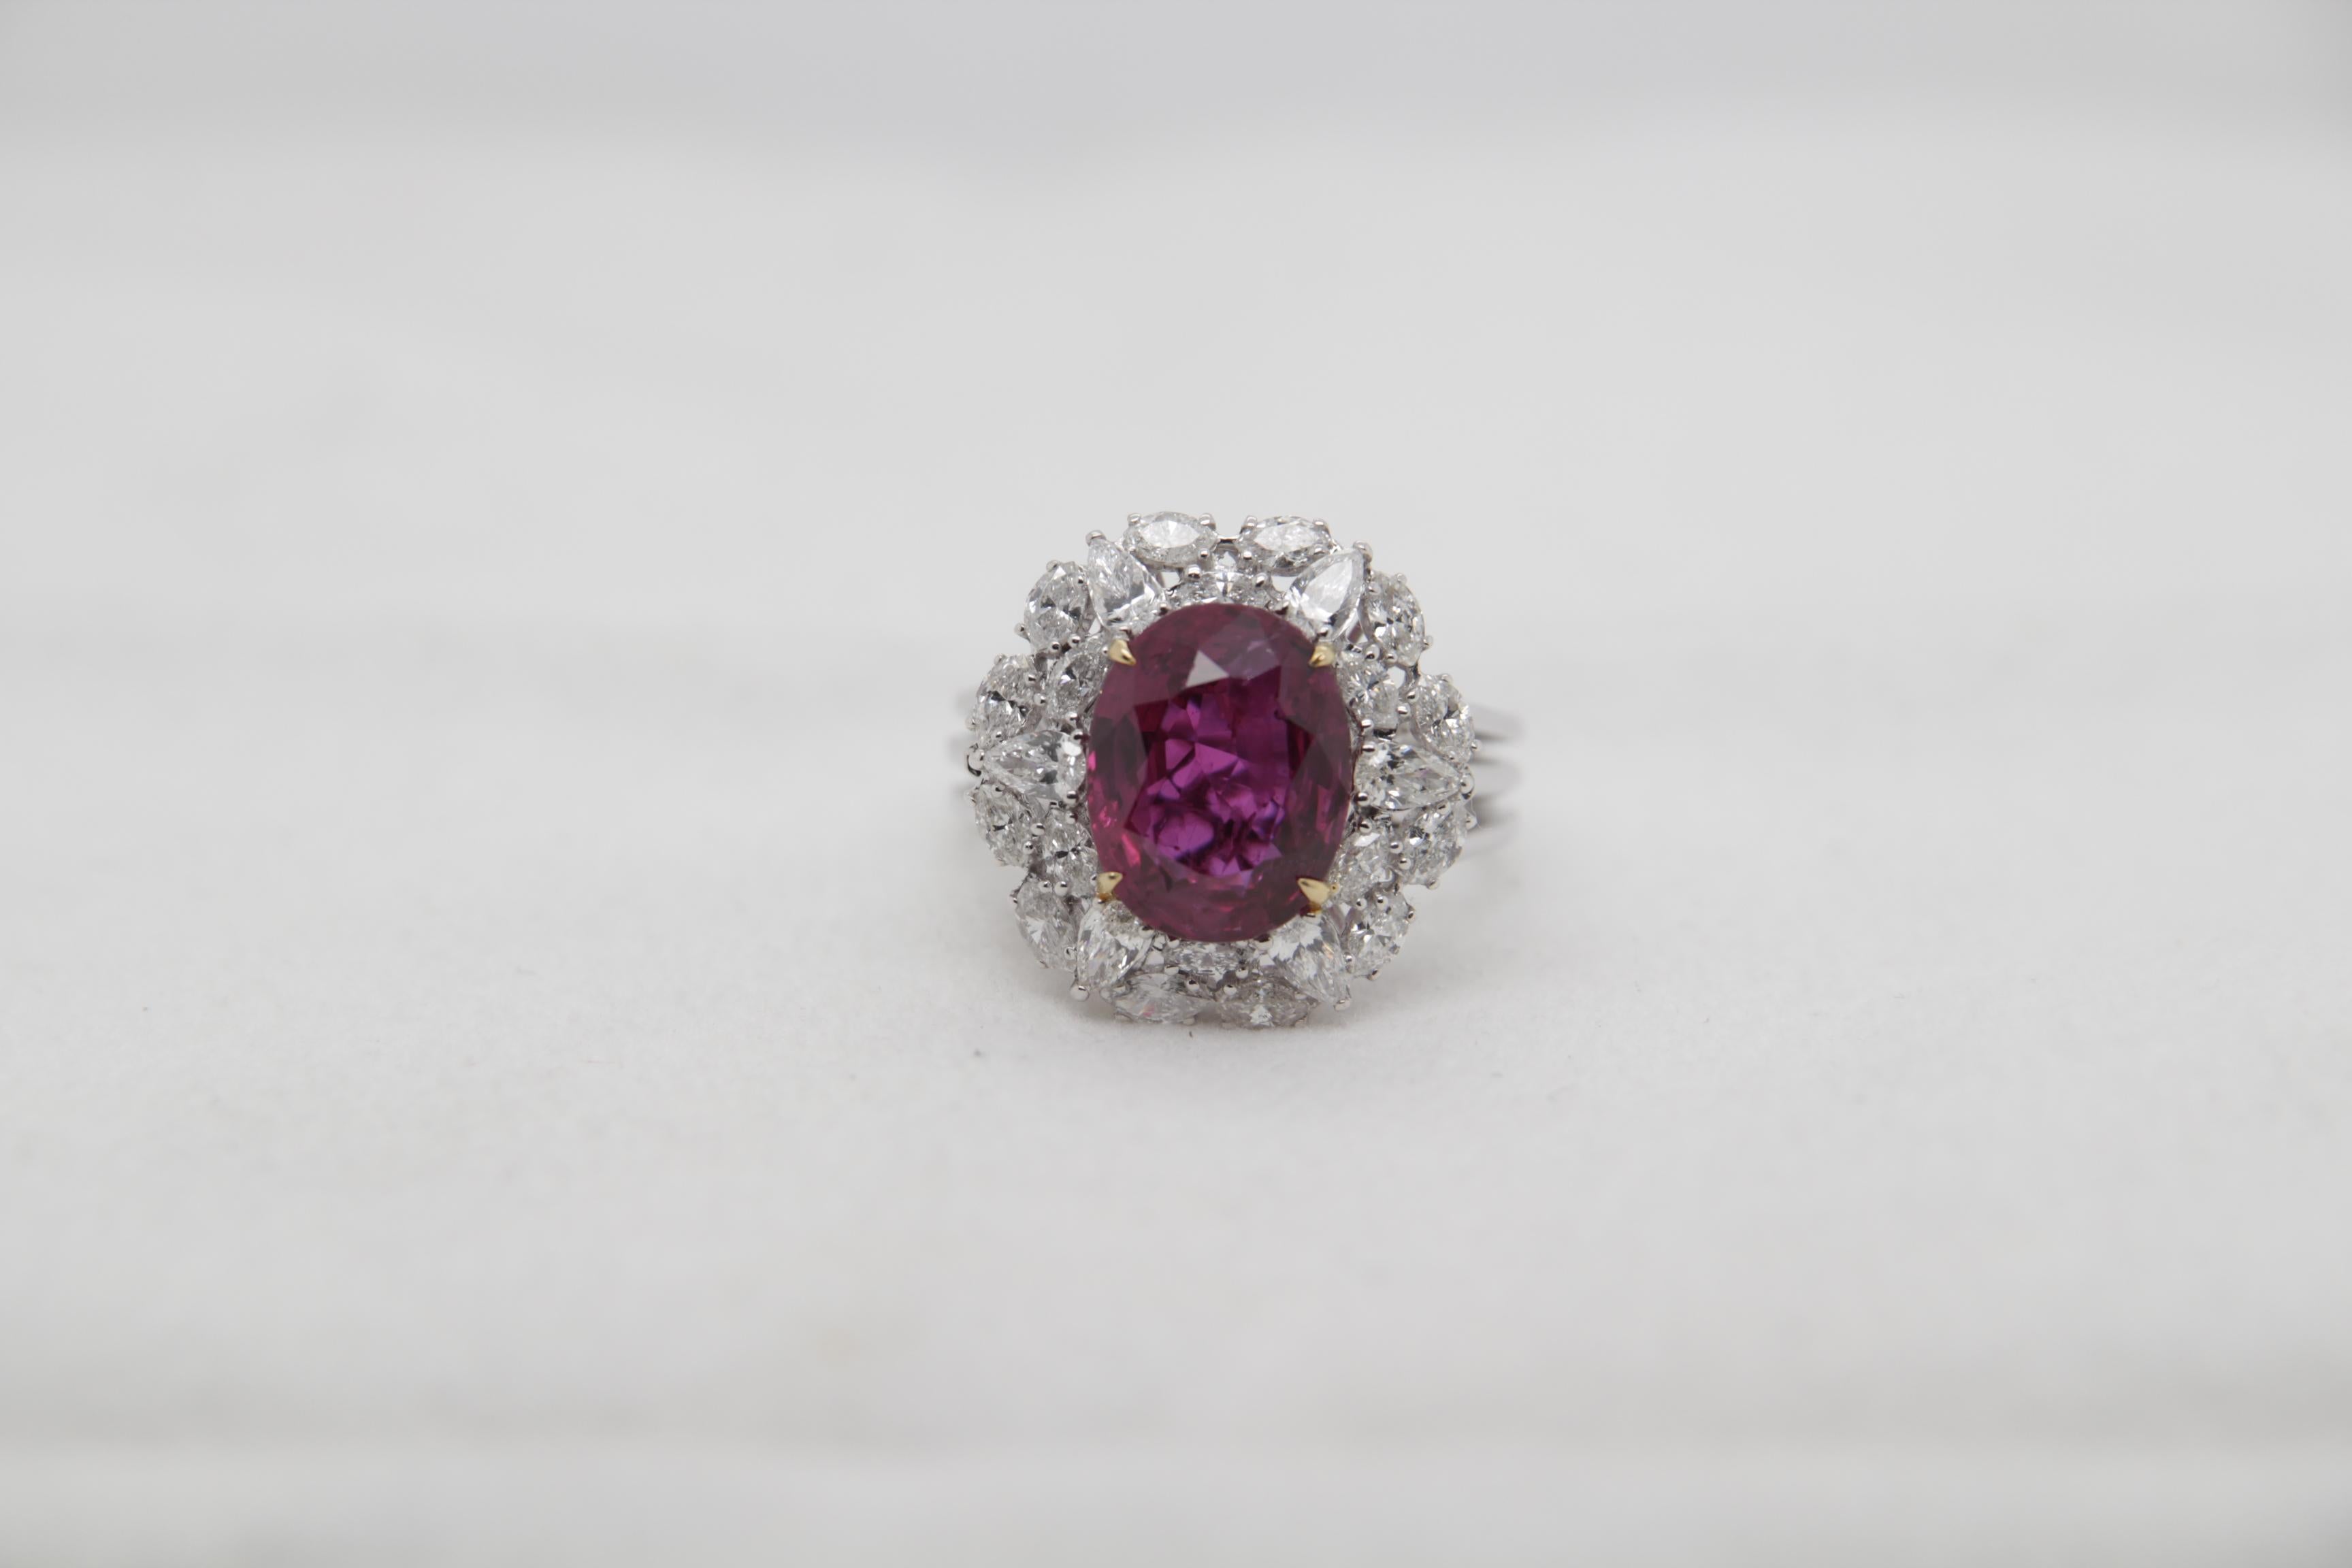 A brand new thai ruby and diamond ring in 18 karat gold. The total thai ruby weight is 4.61 carats and is certified by Gem Research Swisslab (GRS) as natural, 'no heat' and 'red'. The total diamond weight is 1.33 carats and total ring weight is 9.10